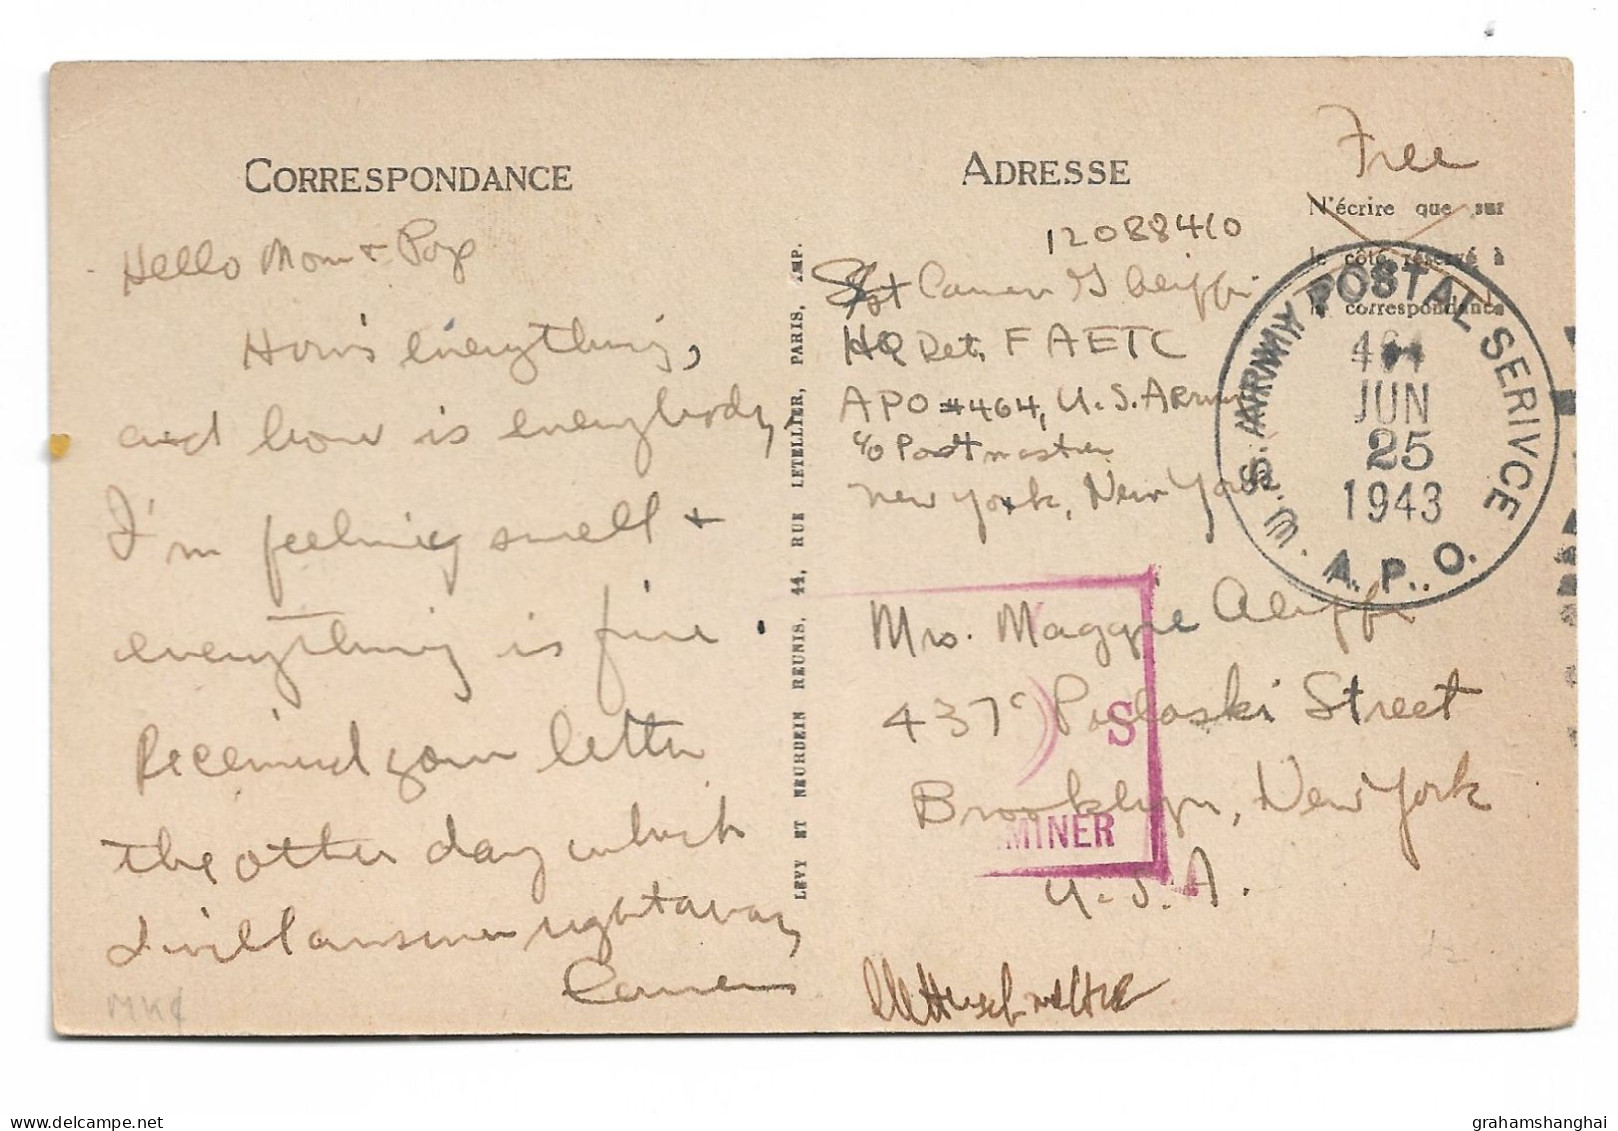 Postcard WW2 North Africa US Army Post Office APO 464 Fifth Army Tunisia ? Posted June 1943 Aliffi Family New York USA - Guerra 1939-45